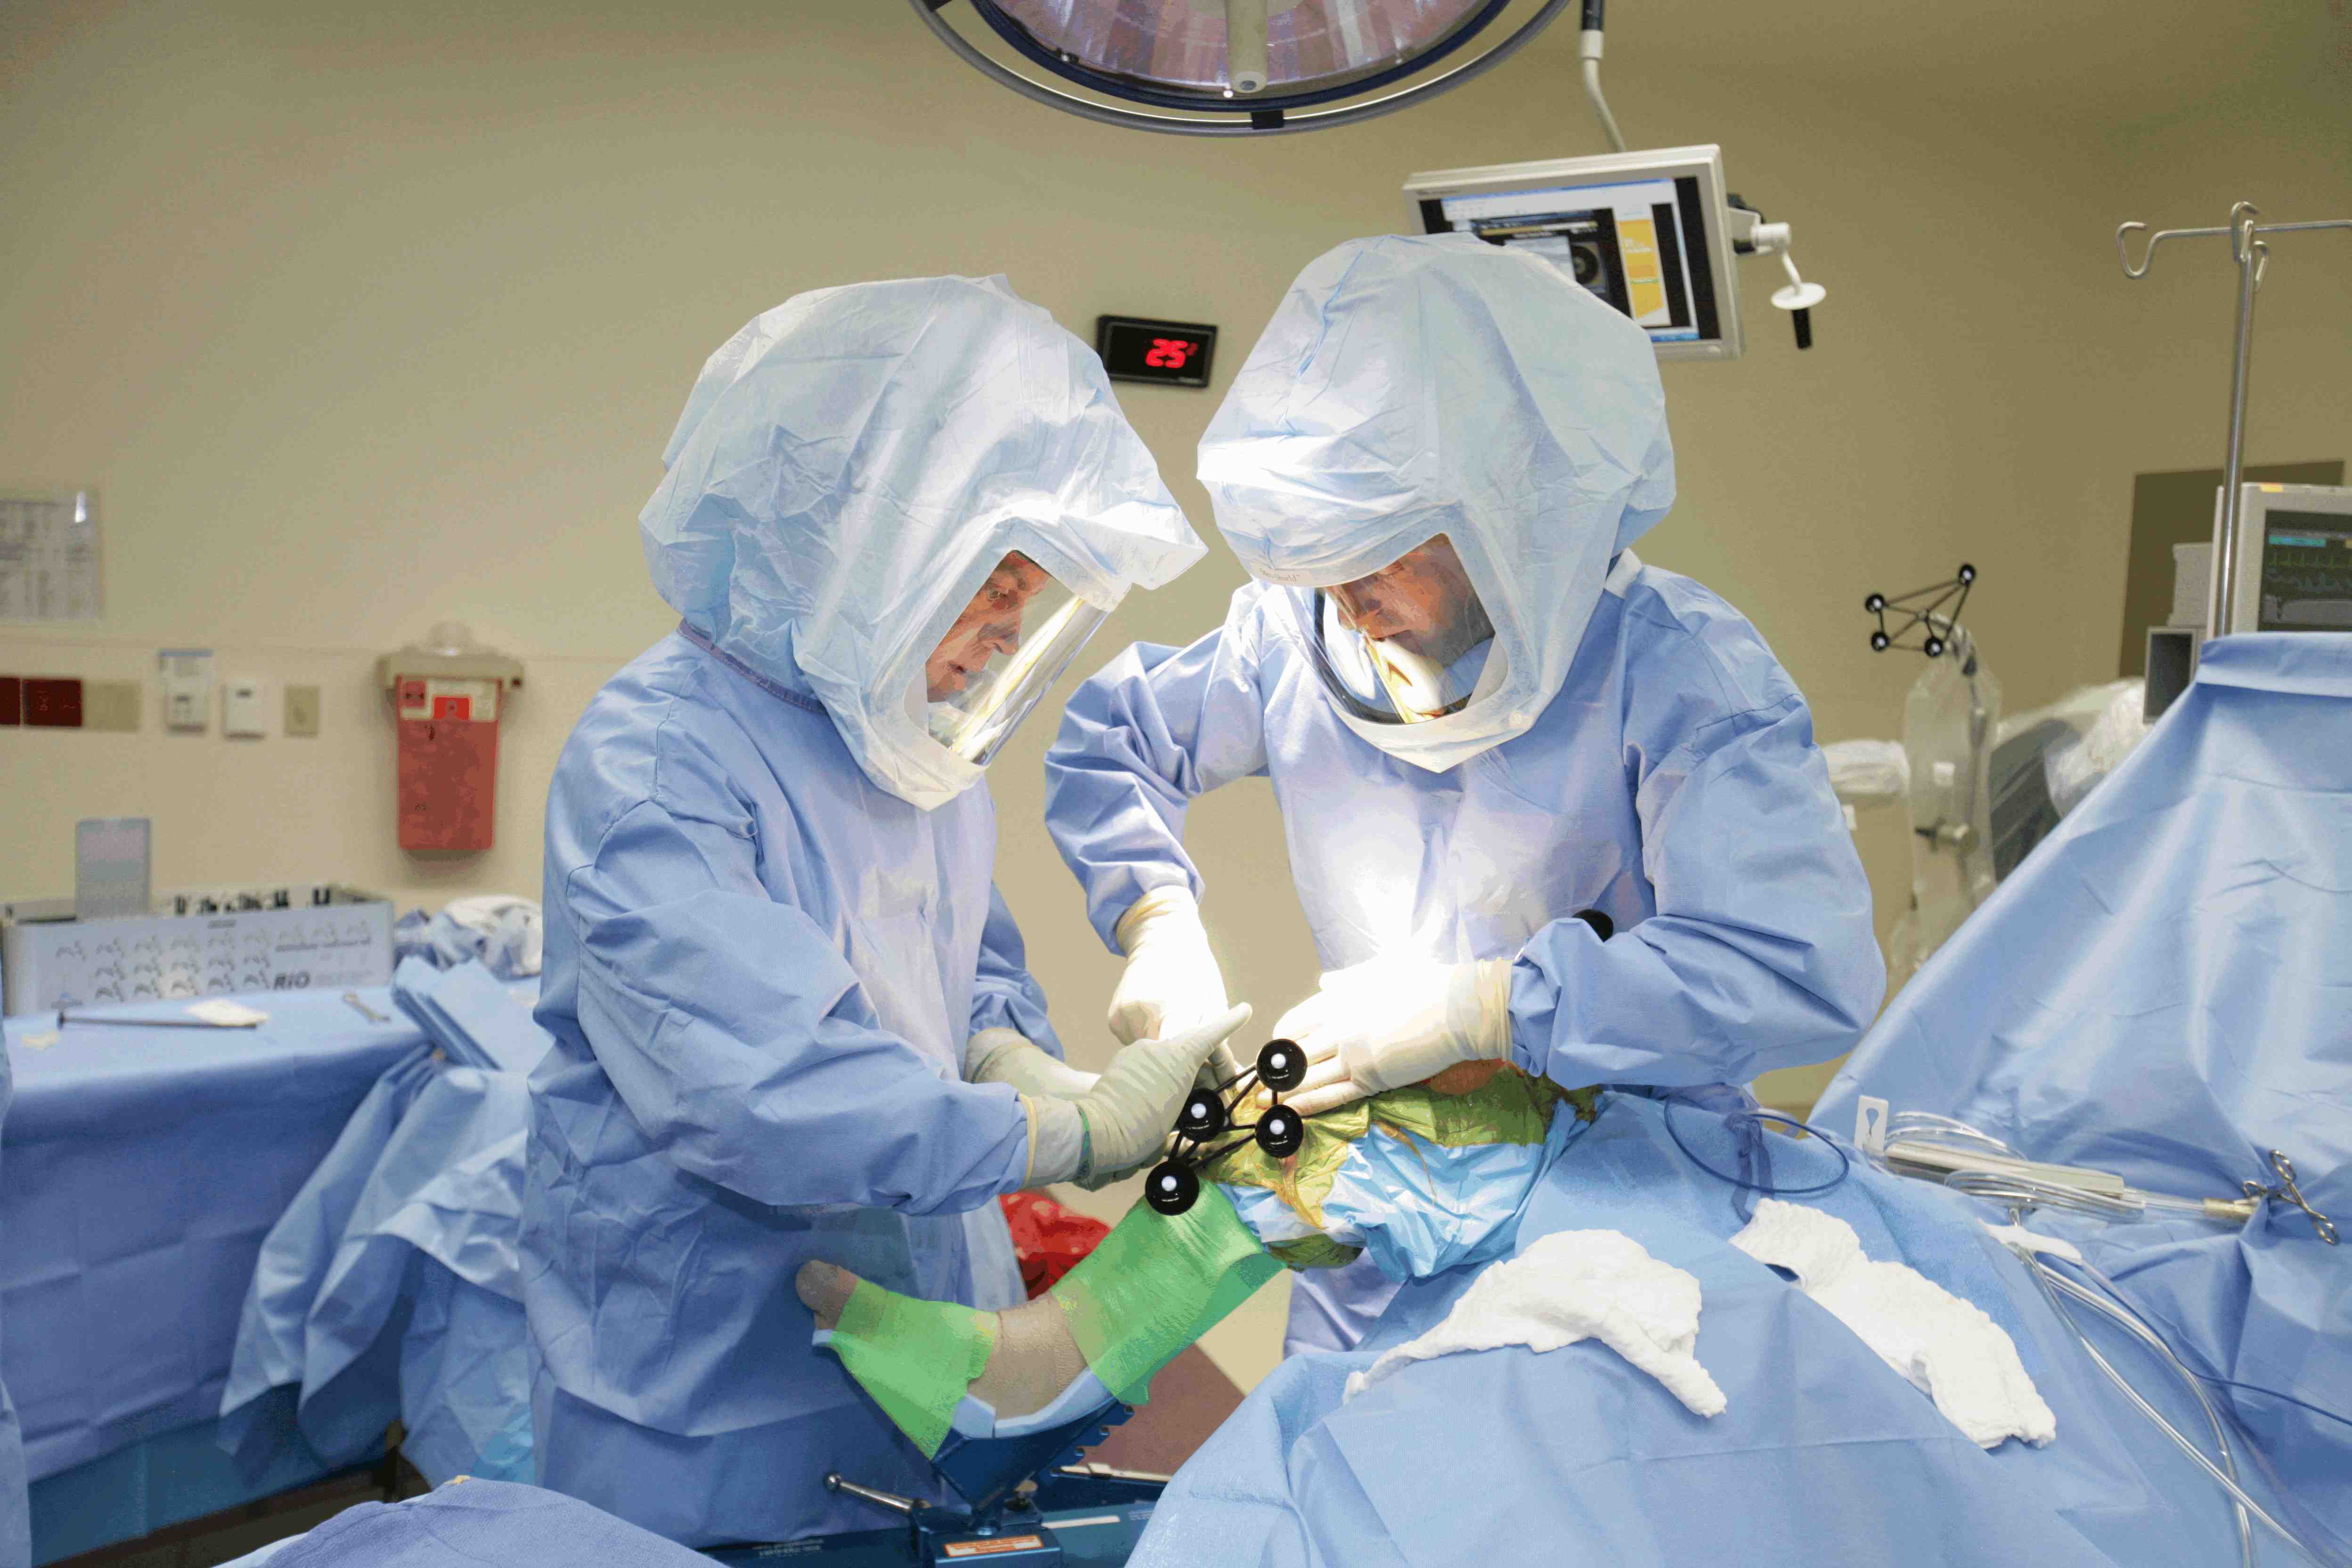 MAKOplasty delays total knee replacement surgery